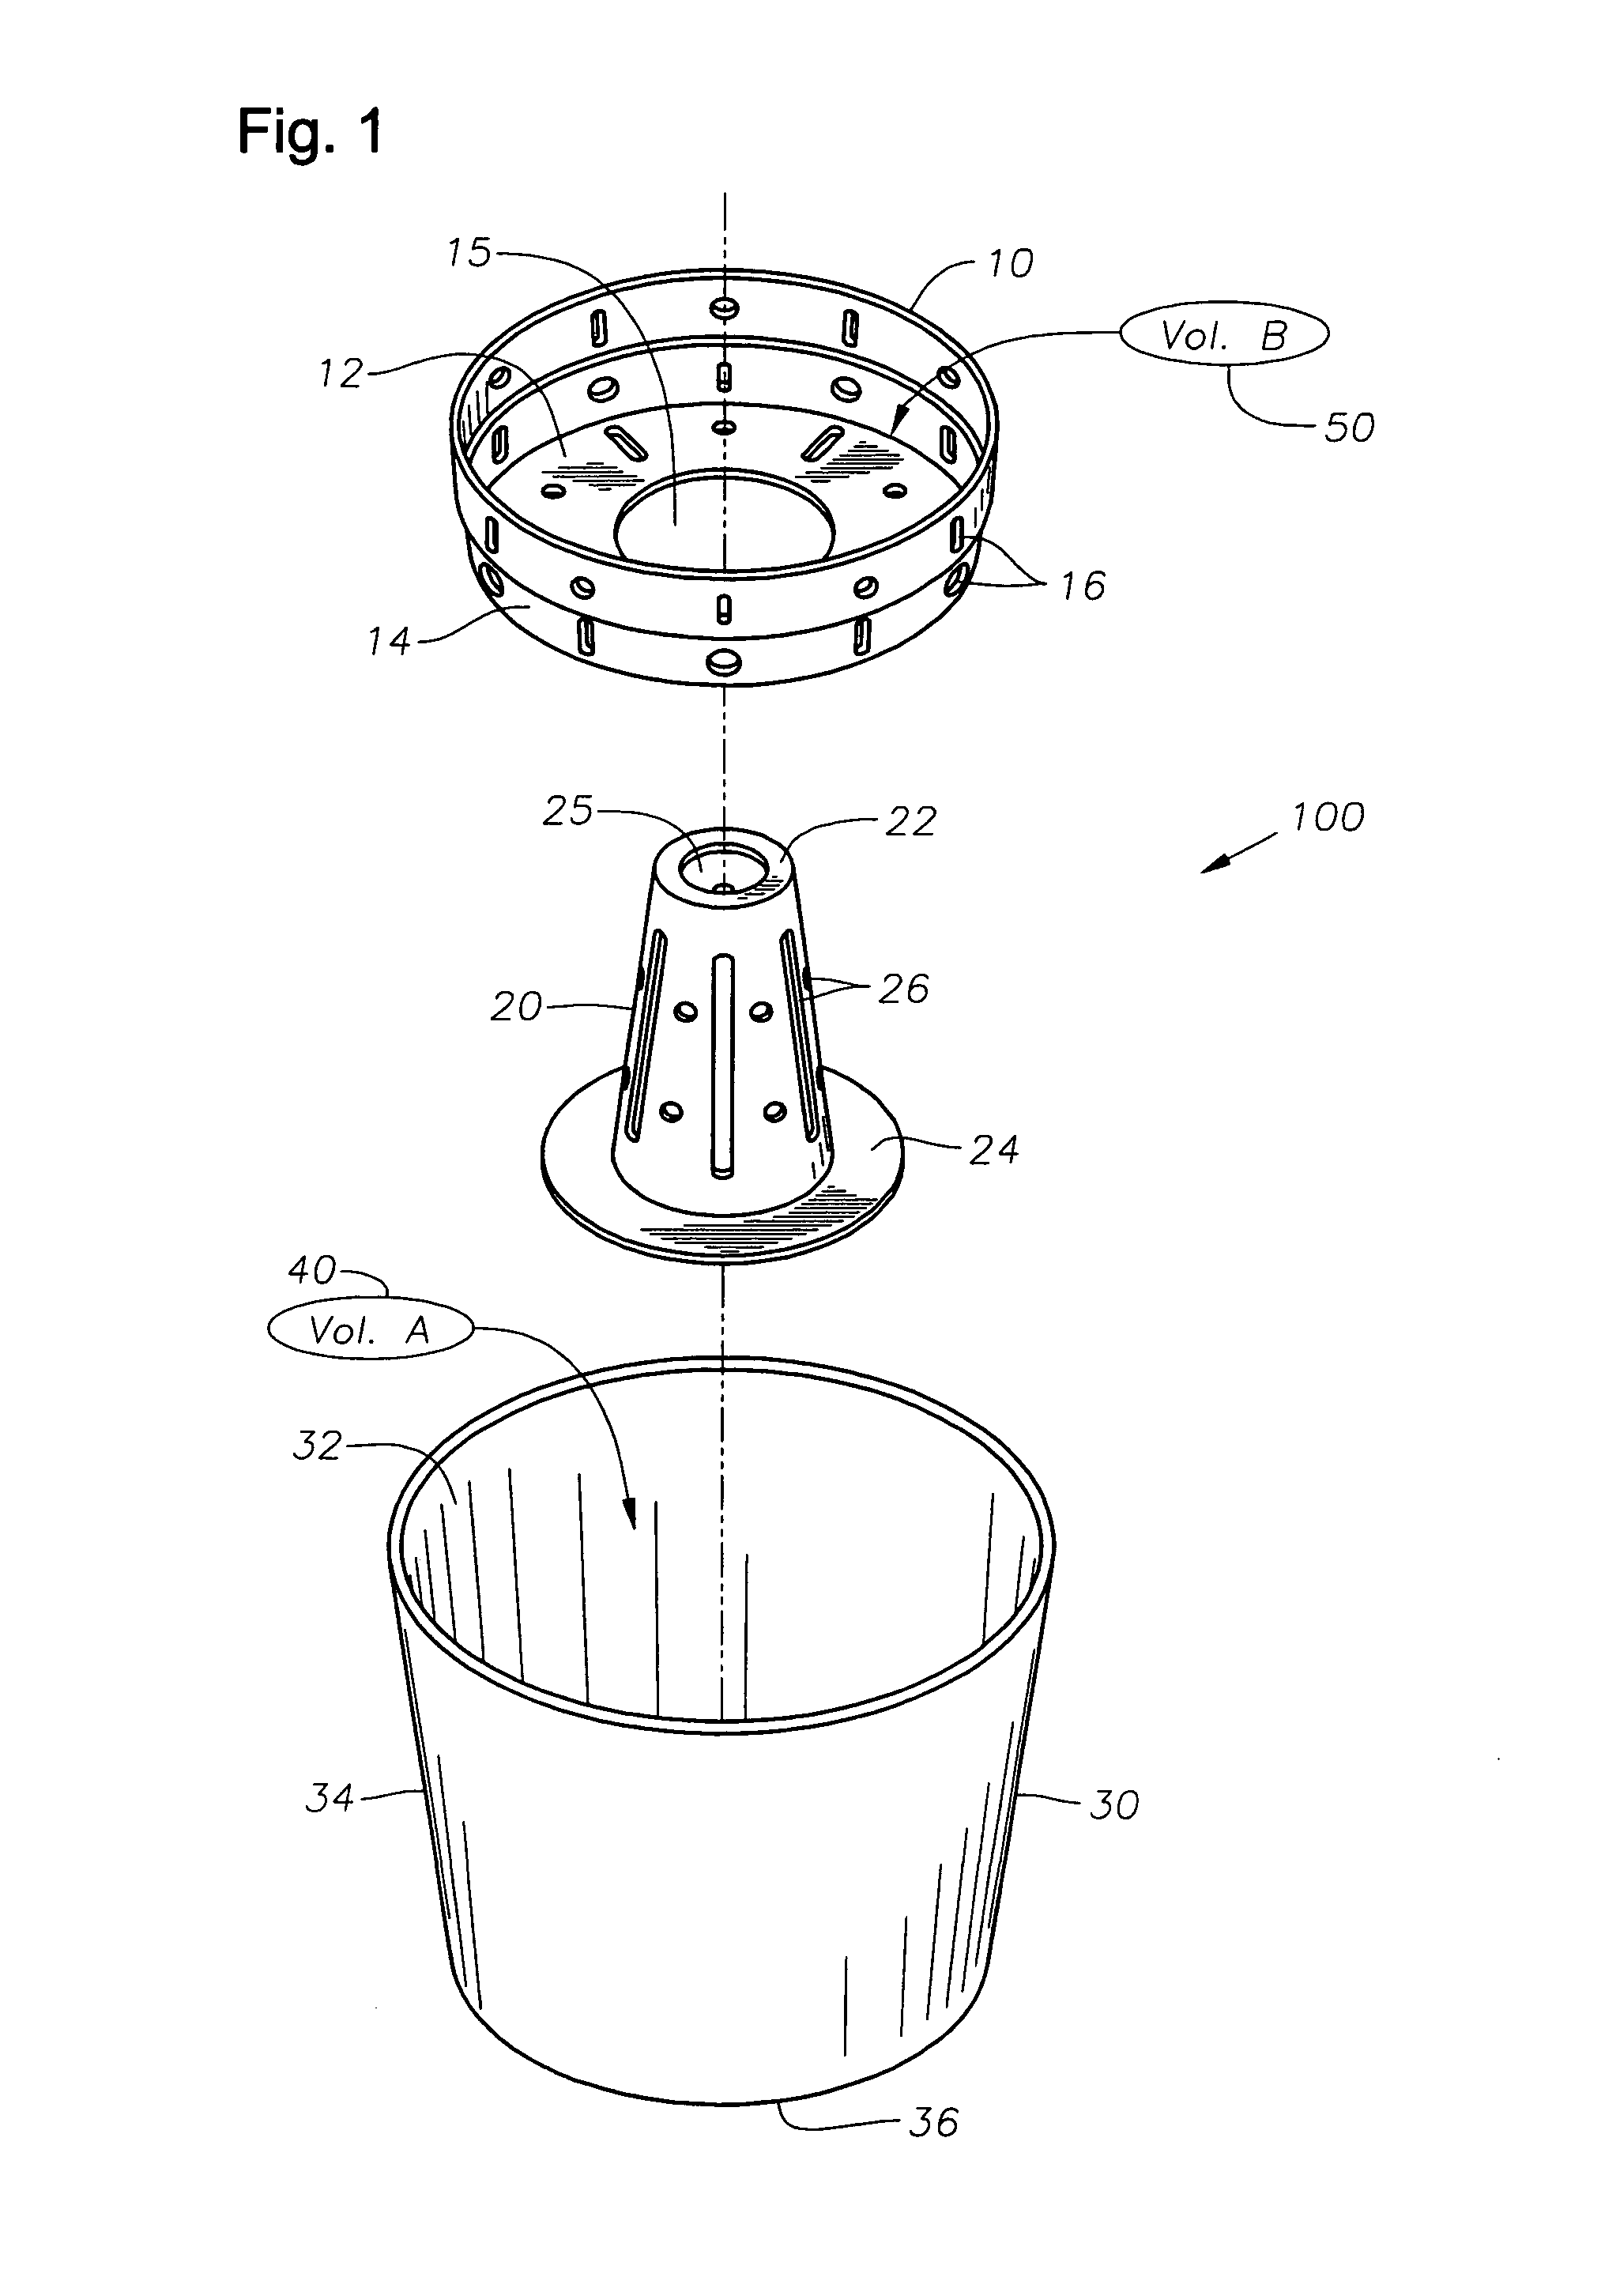 Apparatus and method for removing airborne moisture